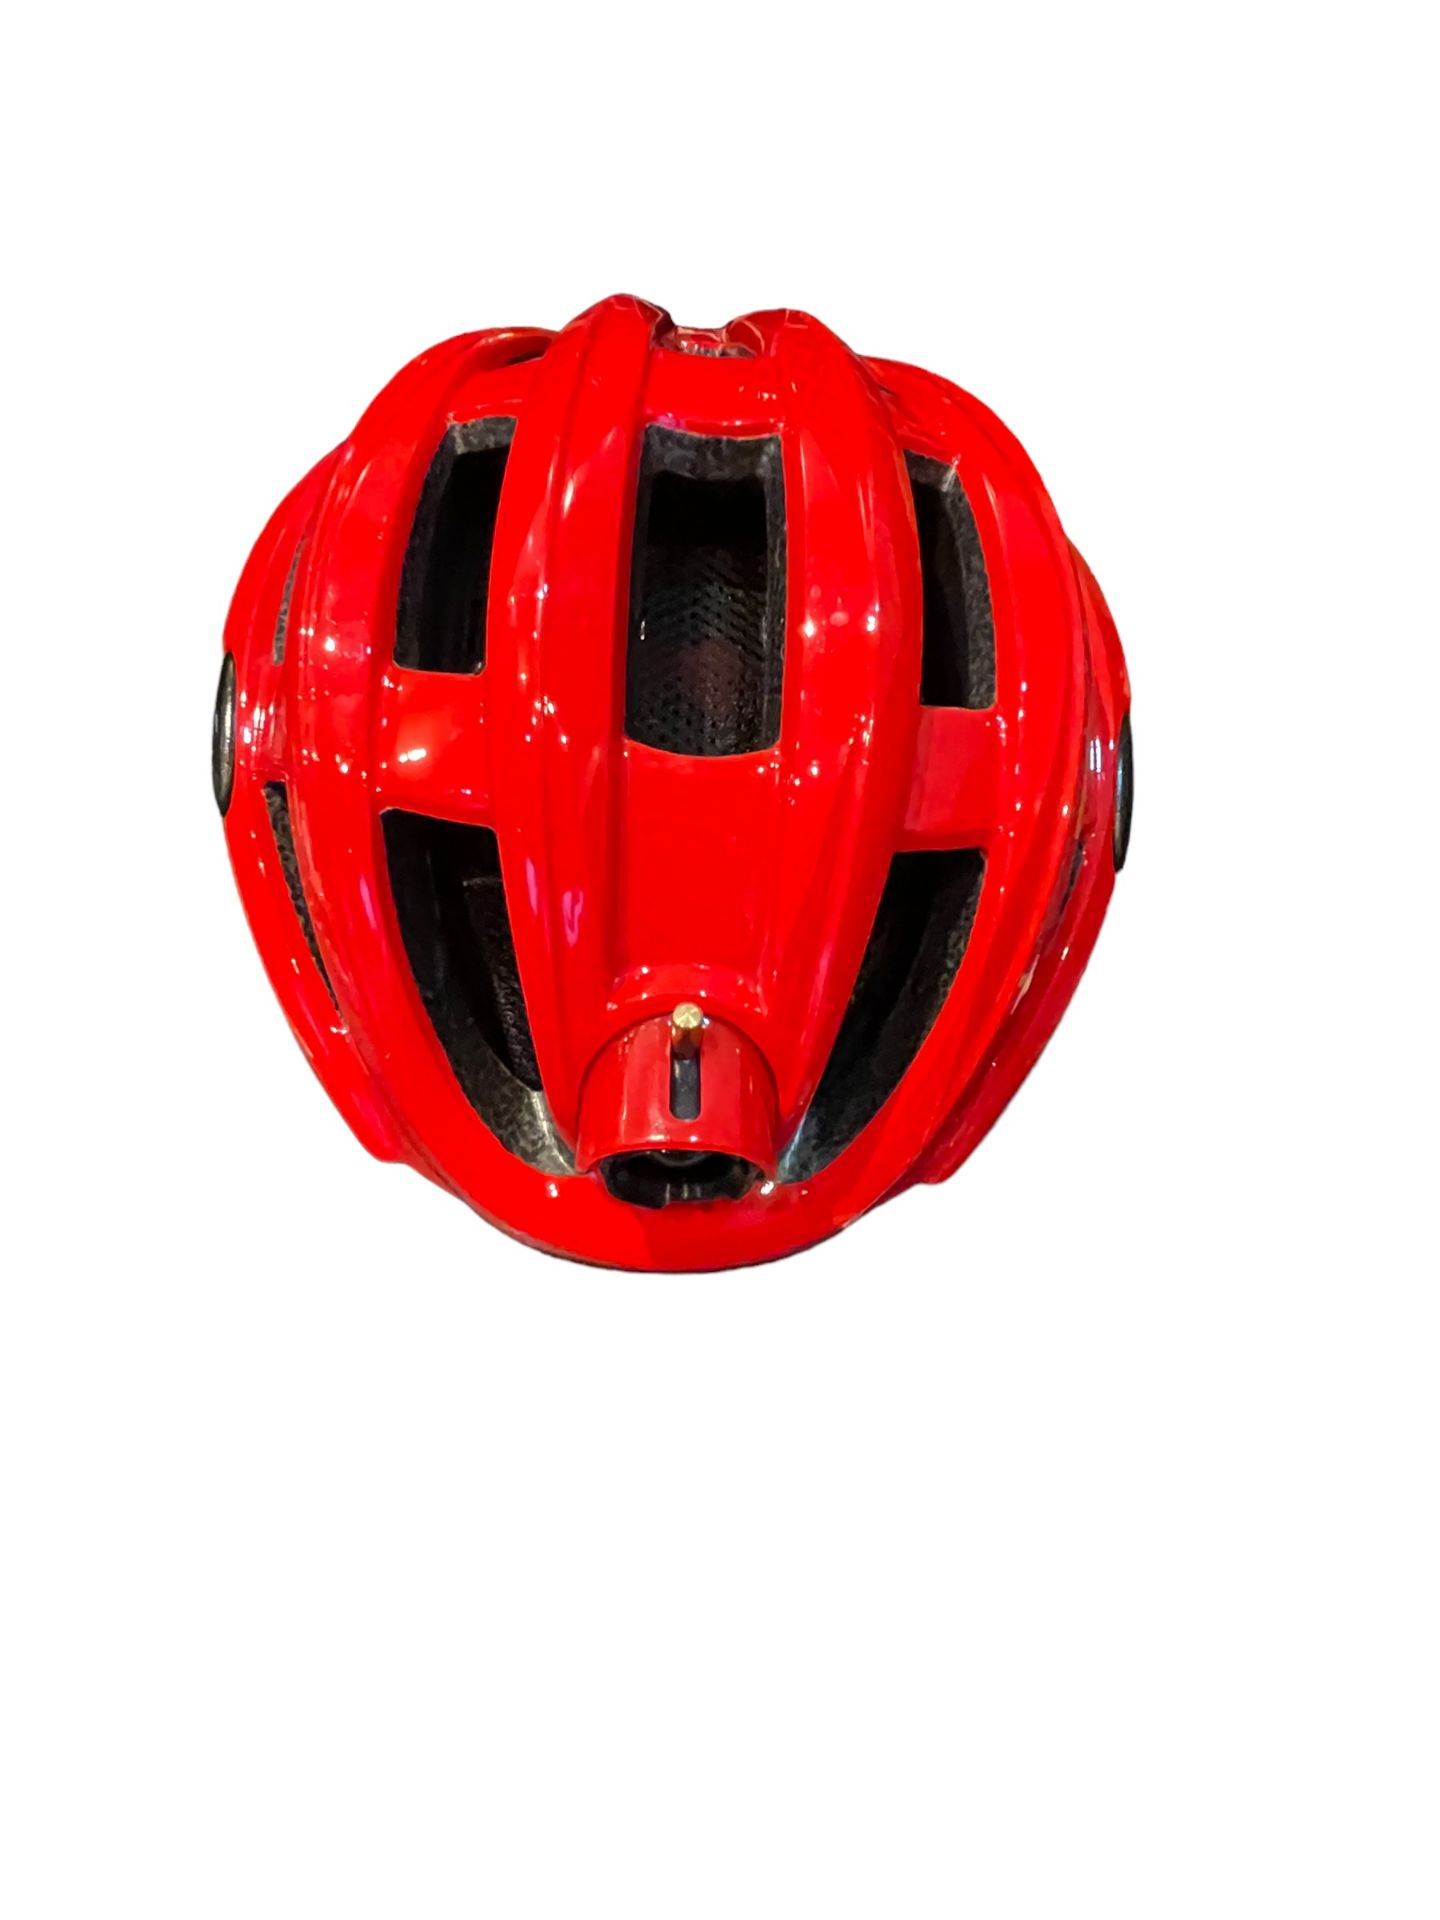 Rock Bros Cycling Helmet fully working boxed demo - Image 8 of 8